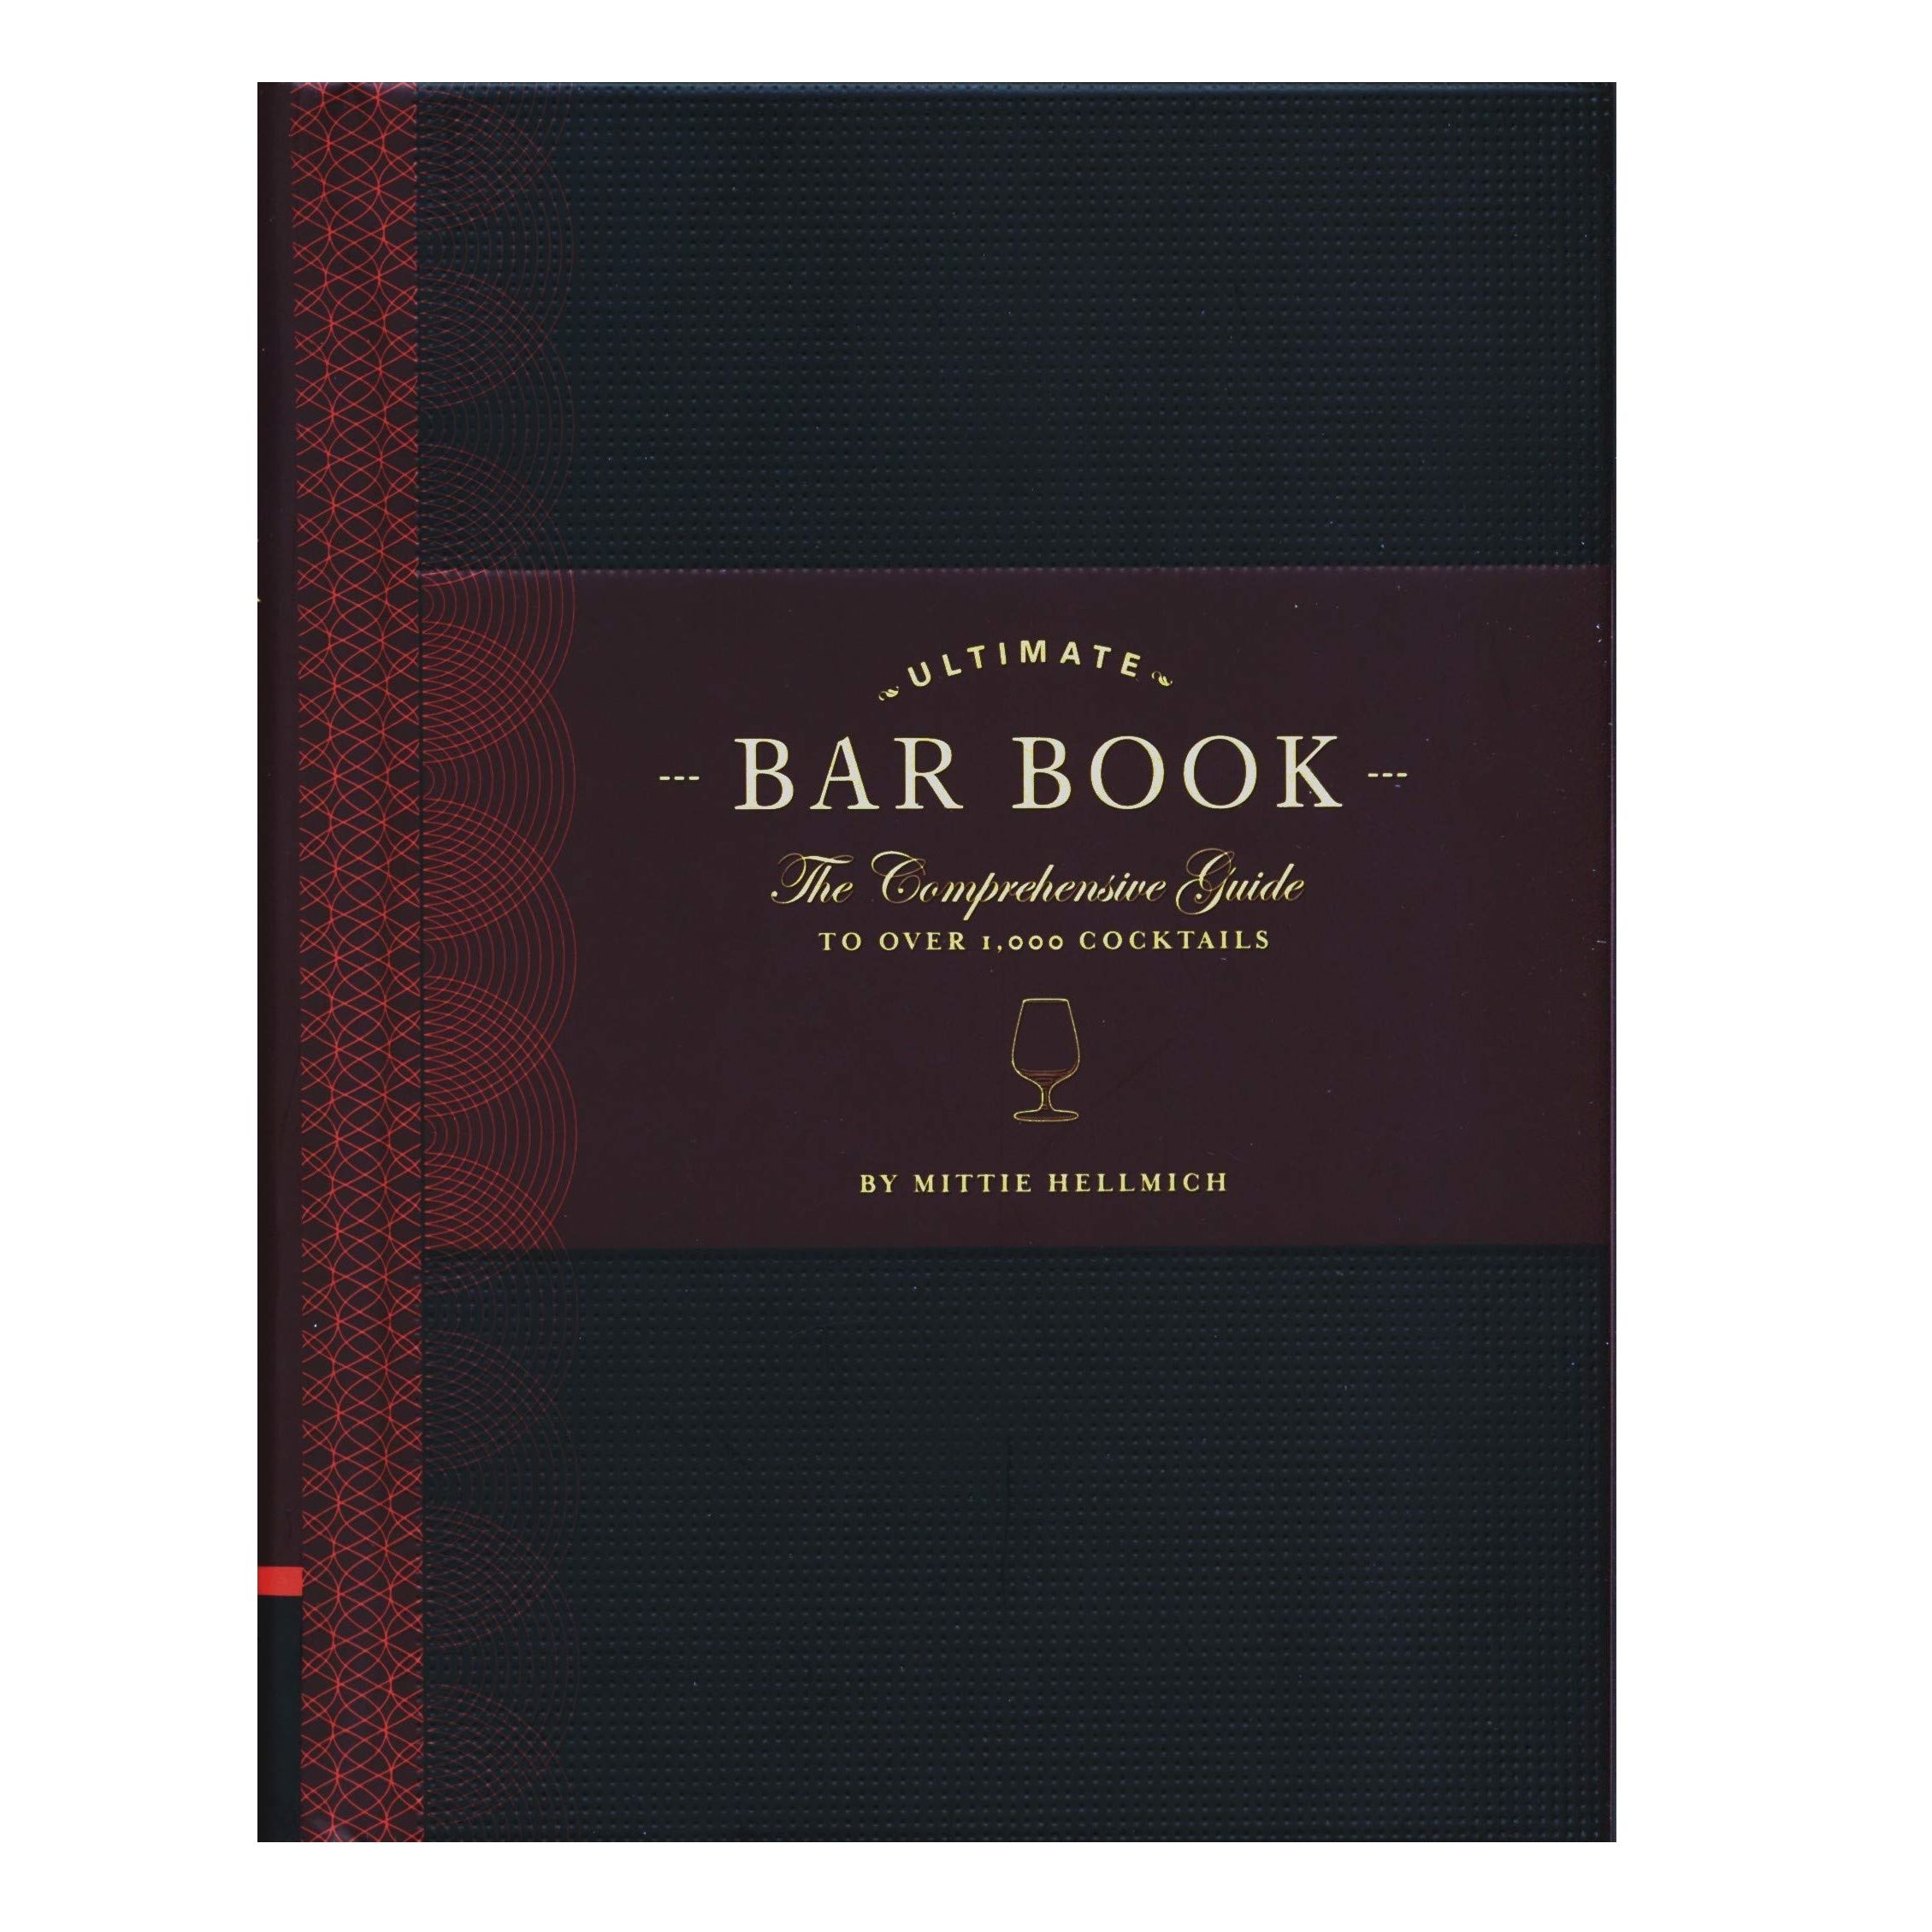 The Ultimate Bar Book: the Comprehensive Guide to over 1,000 Cocktails (Cocktail  Book, Bartender Book, Mixology Book, Mixed Drinks Recipe Book) by Mittie  Hellmich, Hardcover